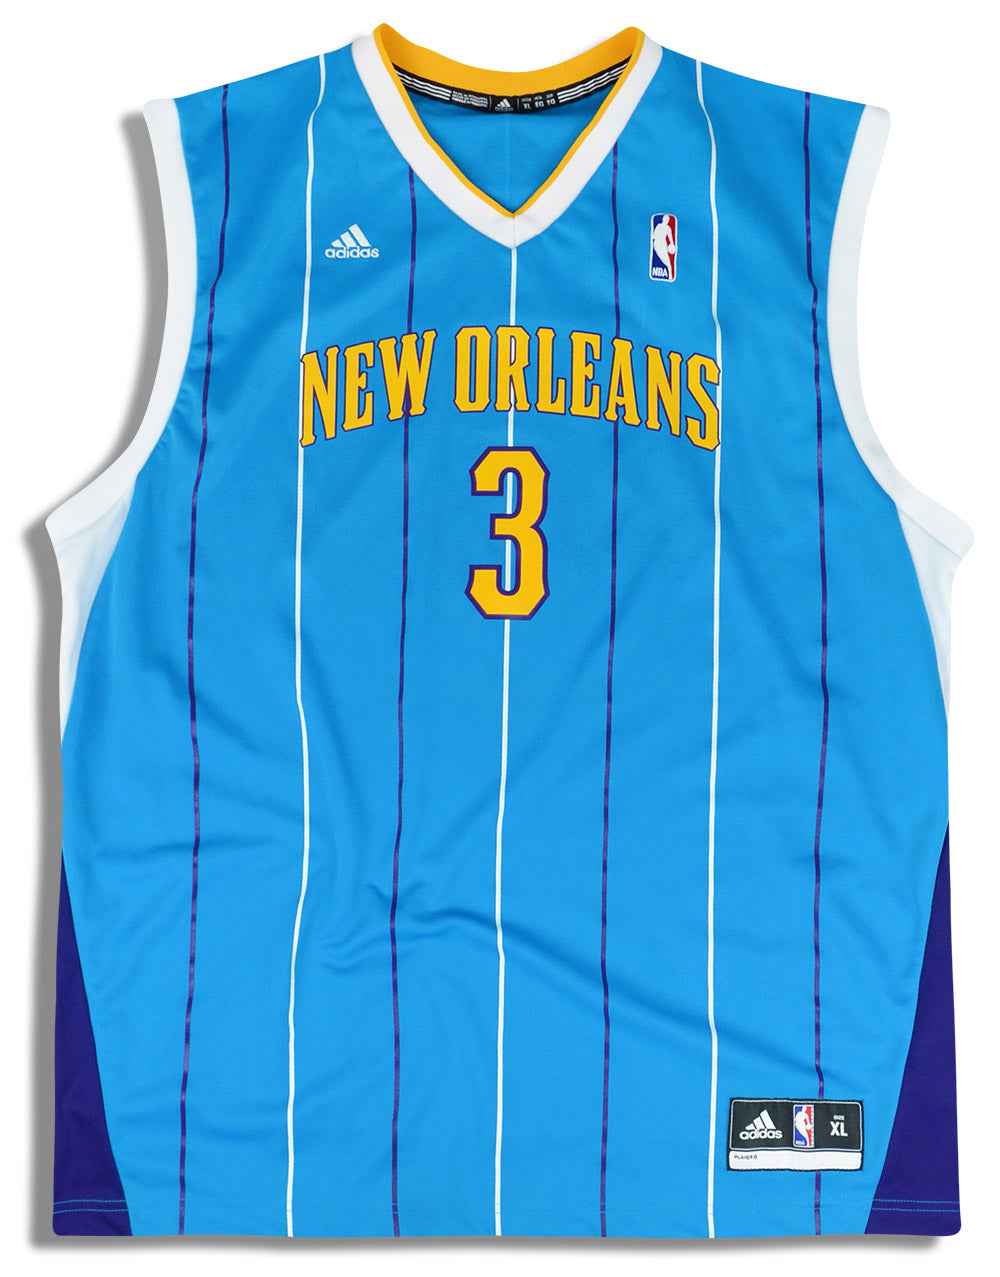 2010-11 NEW ORLEANS PELICANS PAUL #3 ADIDAS JERSEY (AWAY) XL - Classic  American Sports